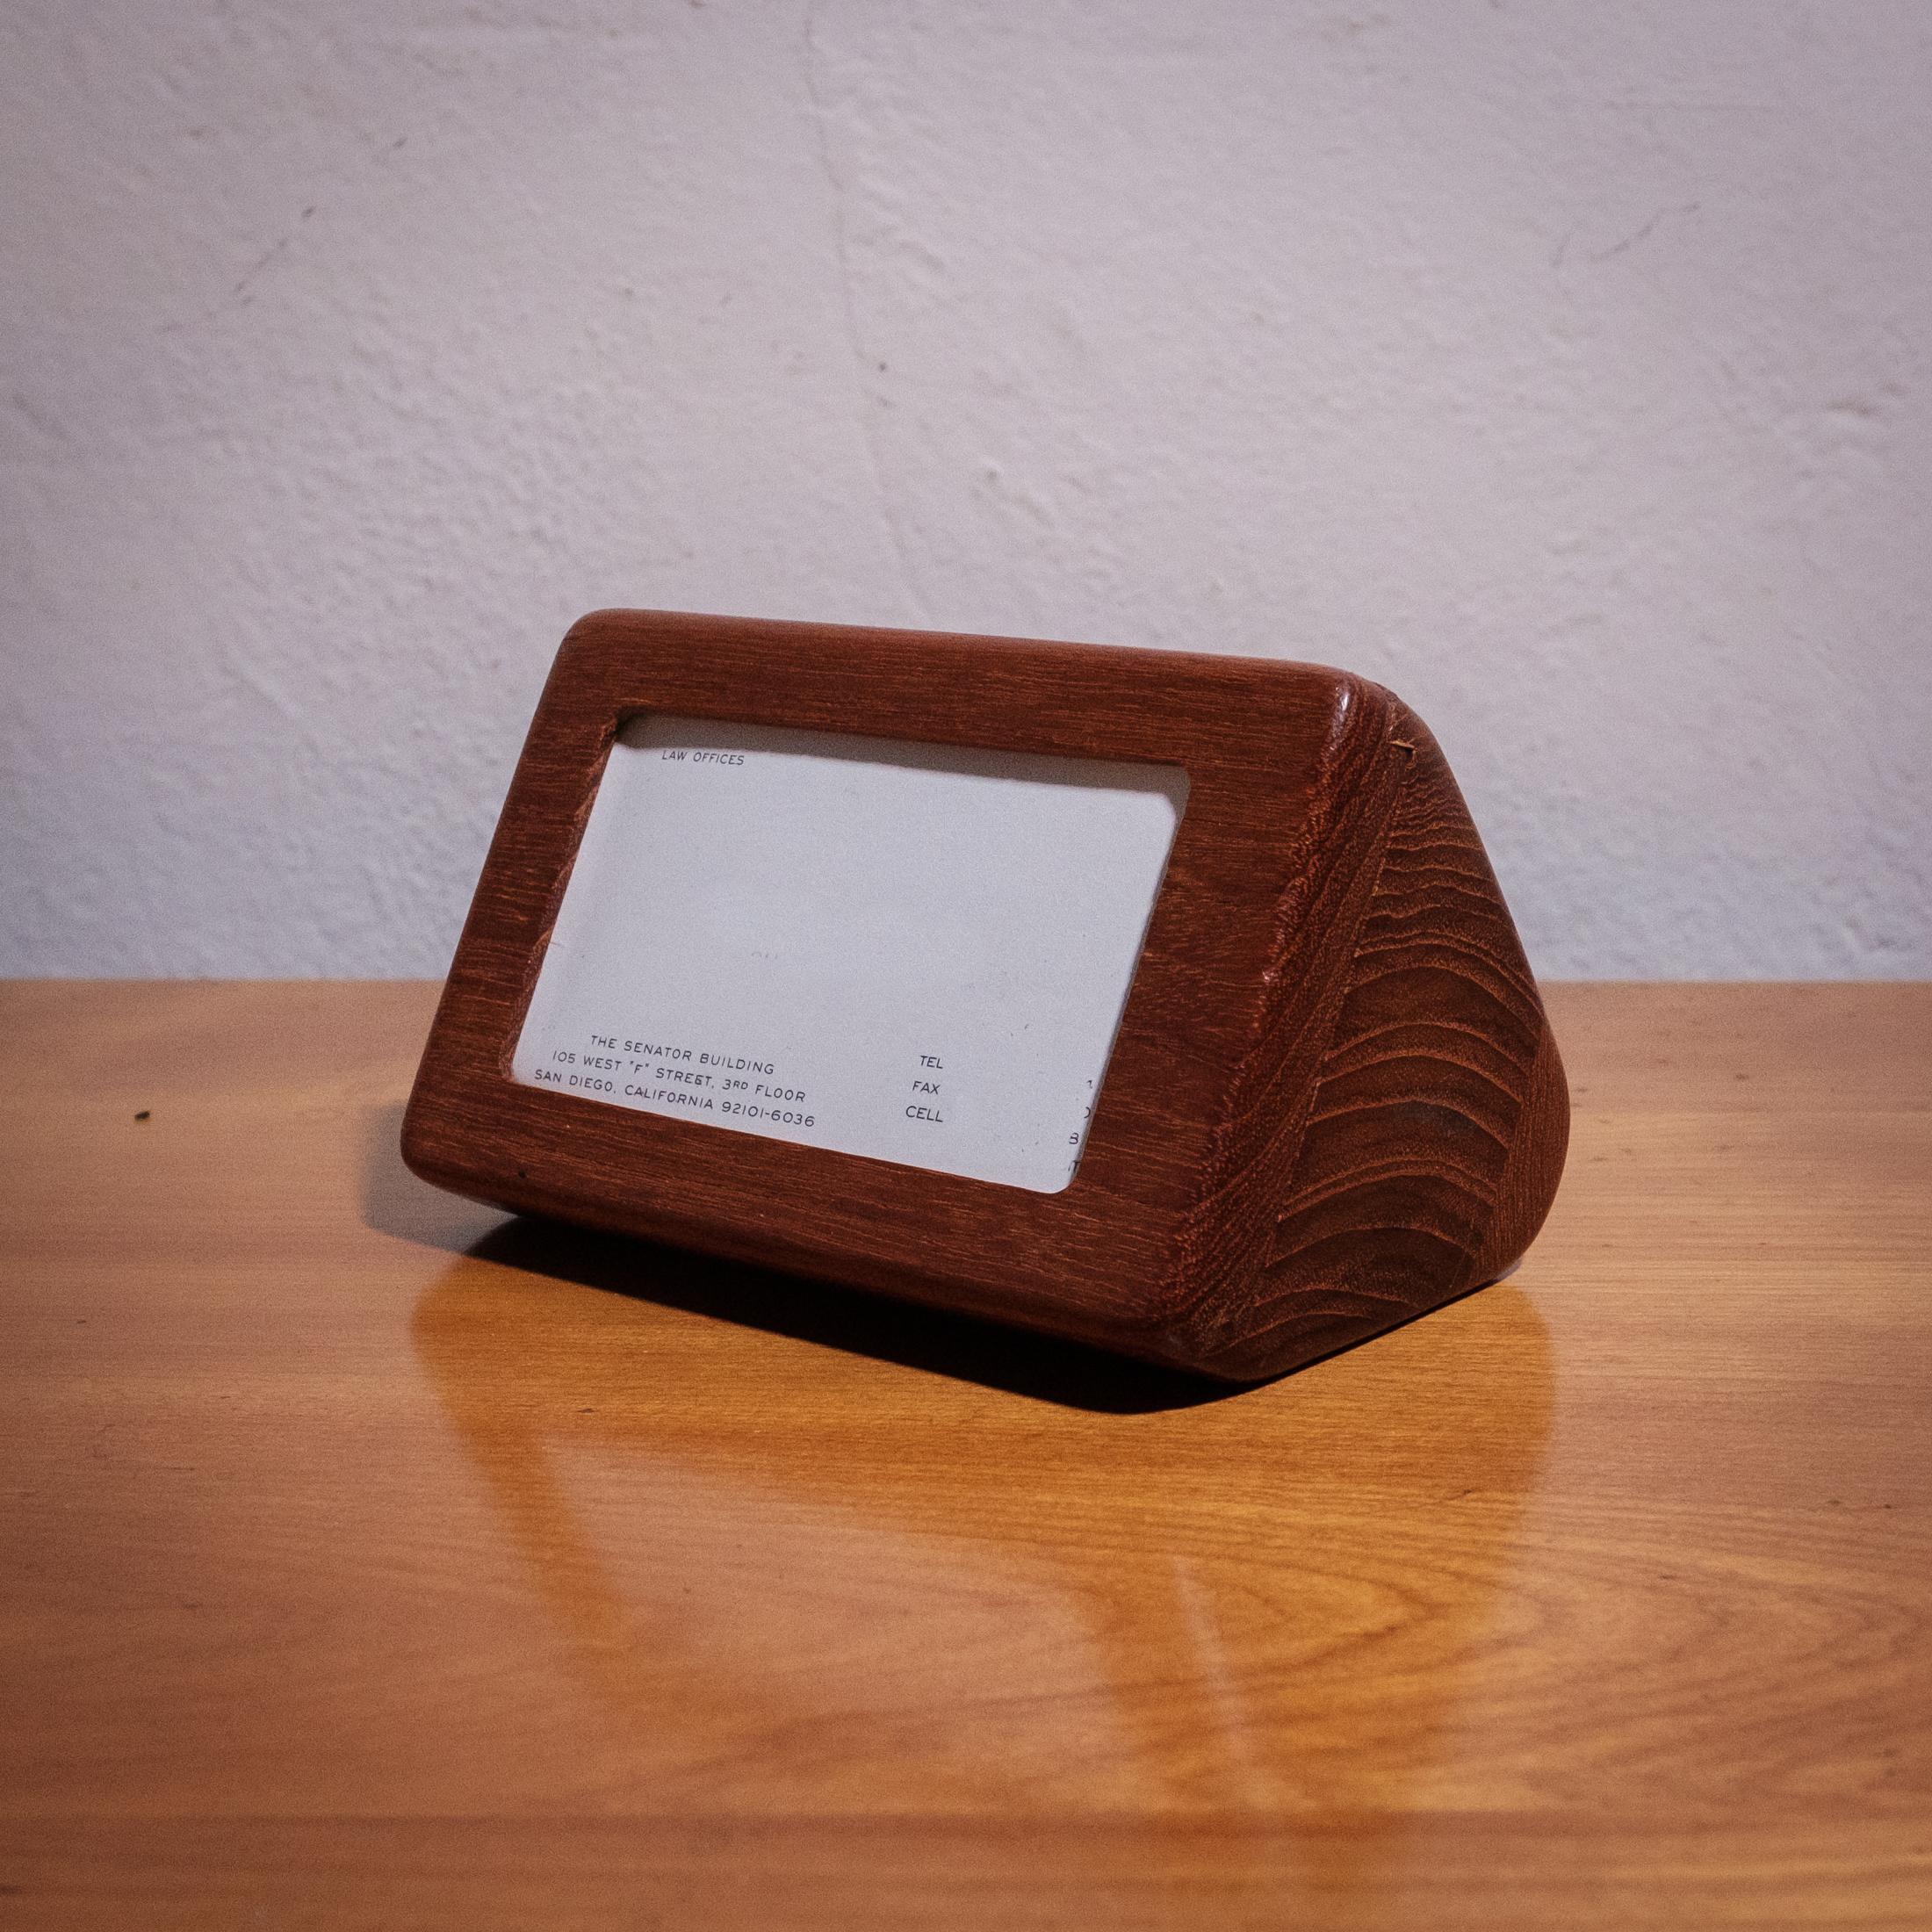 Mid-century studio craft walnut business card holder and display. The front section slides to insert a standard 3.5 inch by 2 inch size card for display and a slot in the back holds a small stack of cards for distribution. A beautifully-crafted